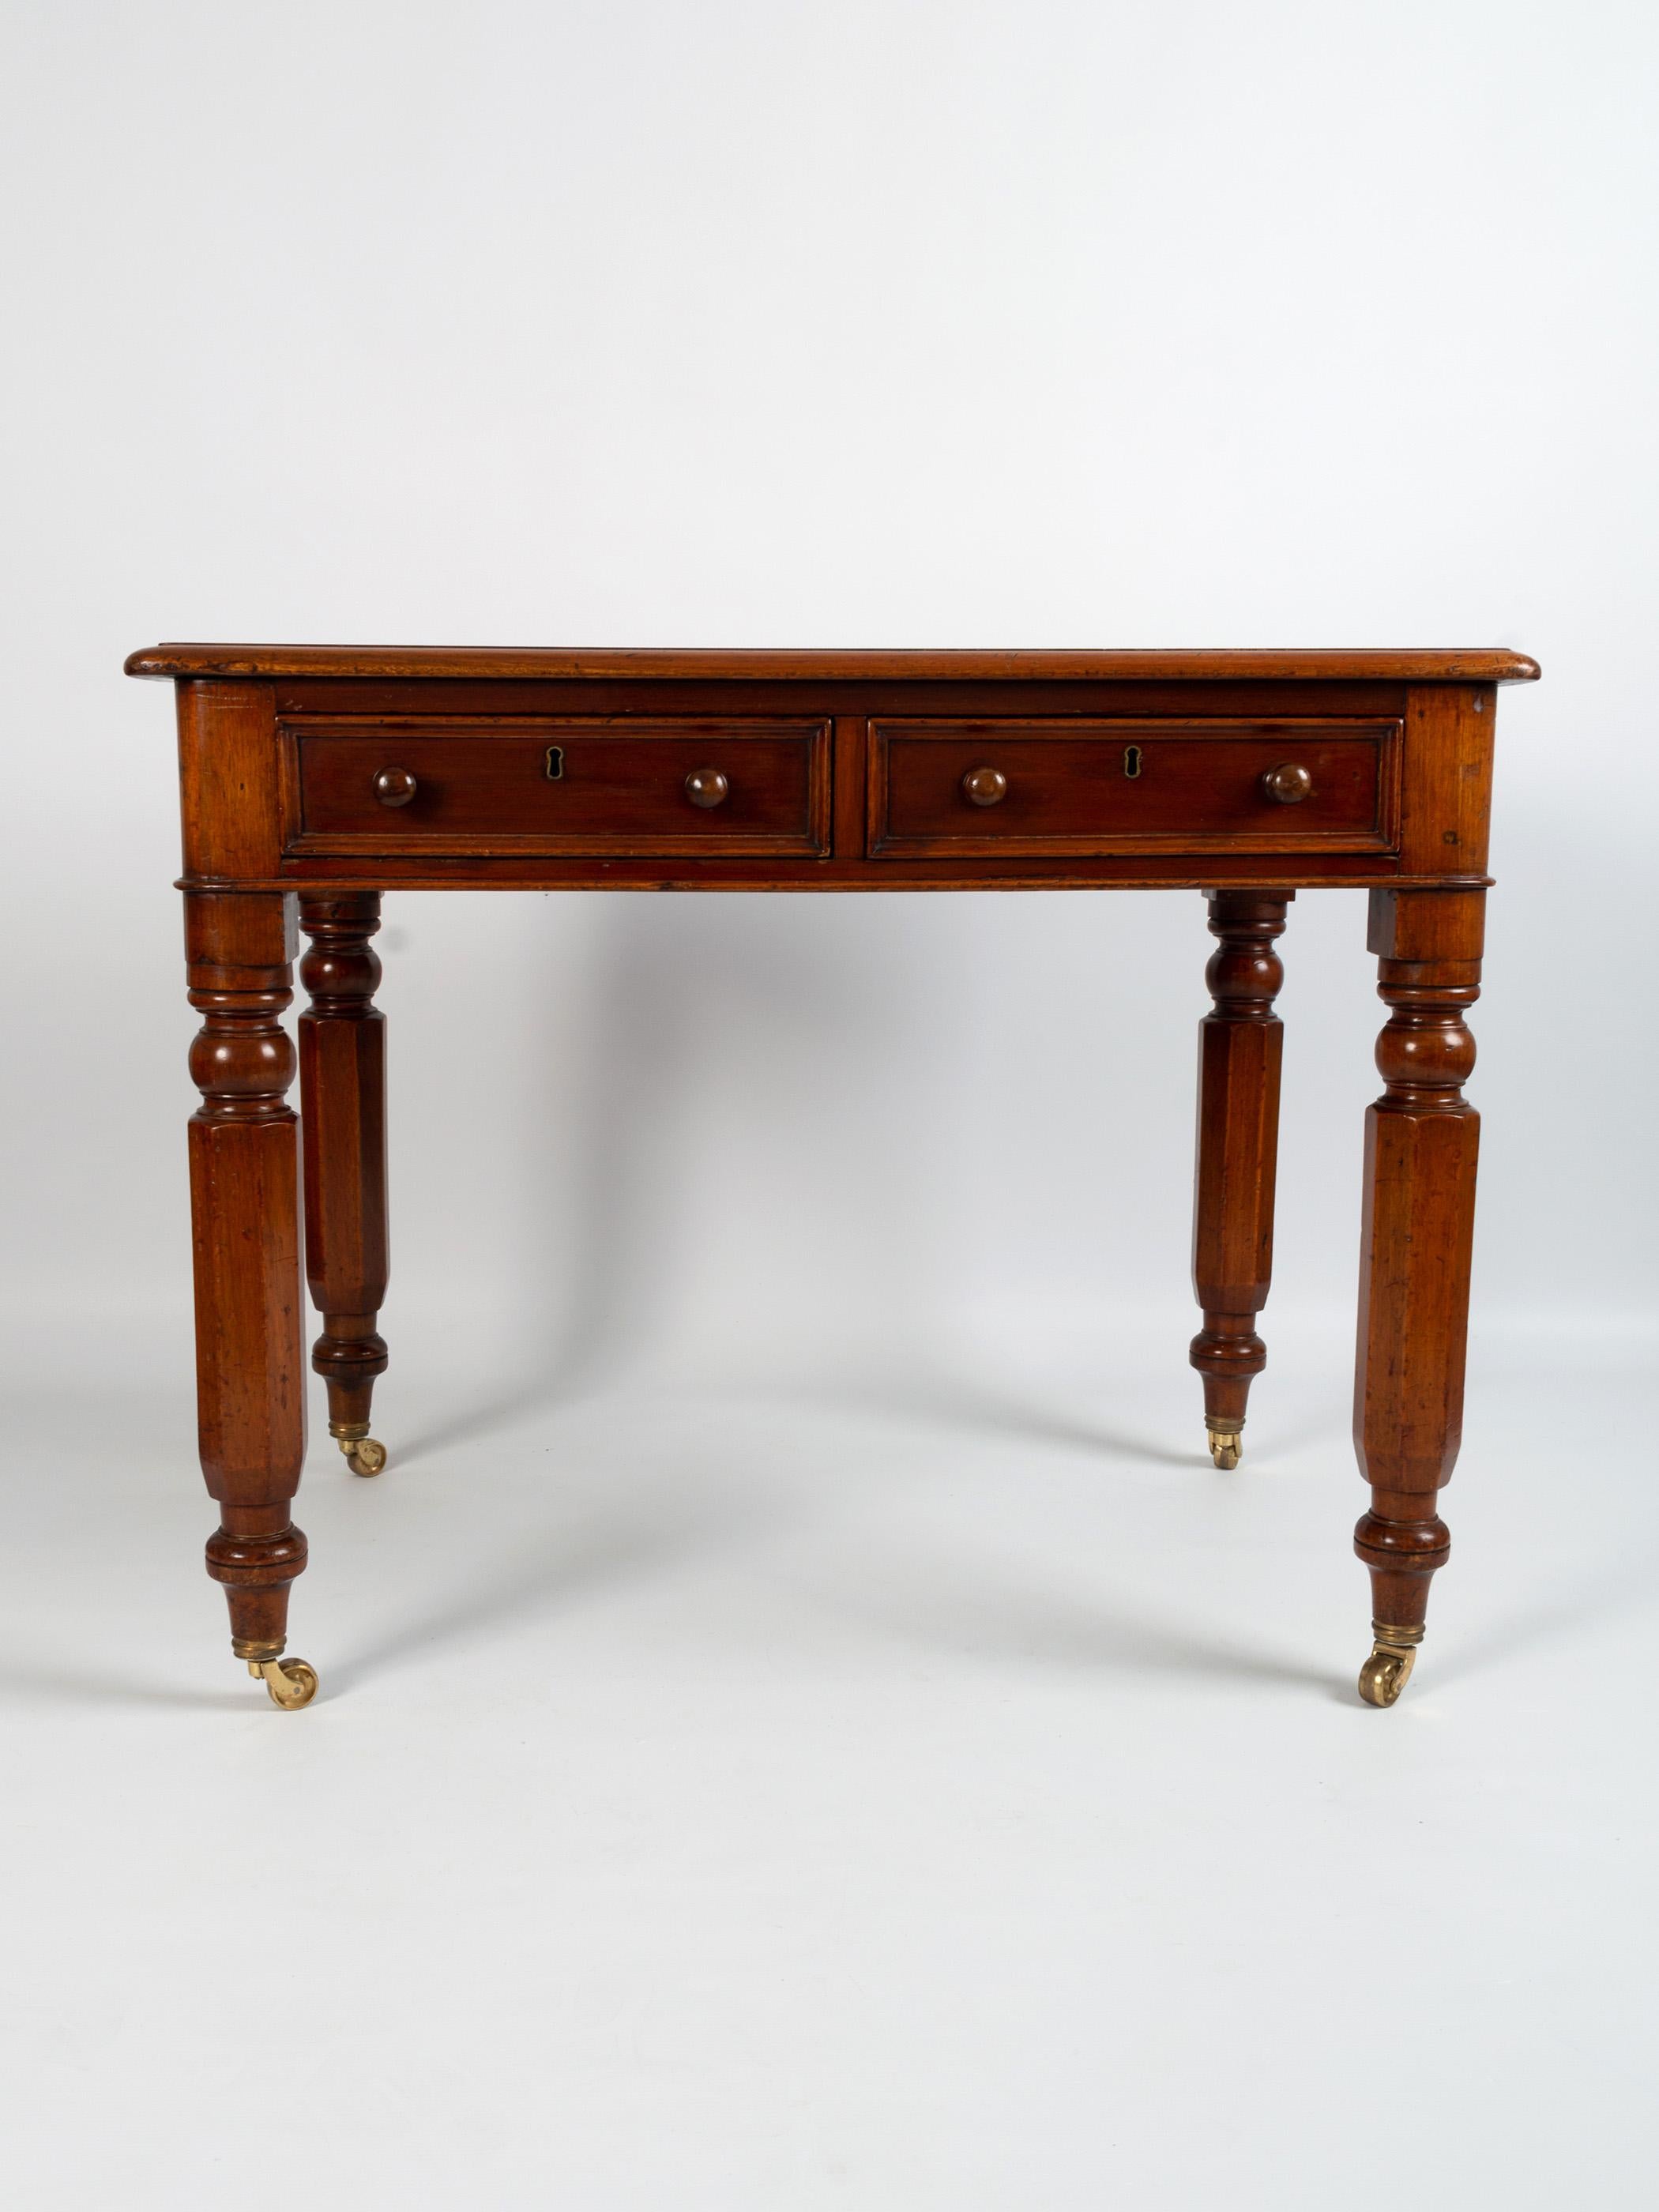 Victorian Antique 19th Century English Leather Inset Library Table, C.1840 For Sale